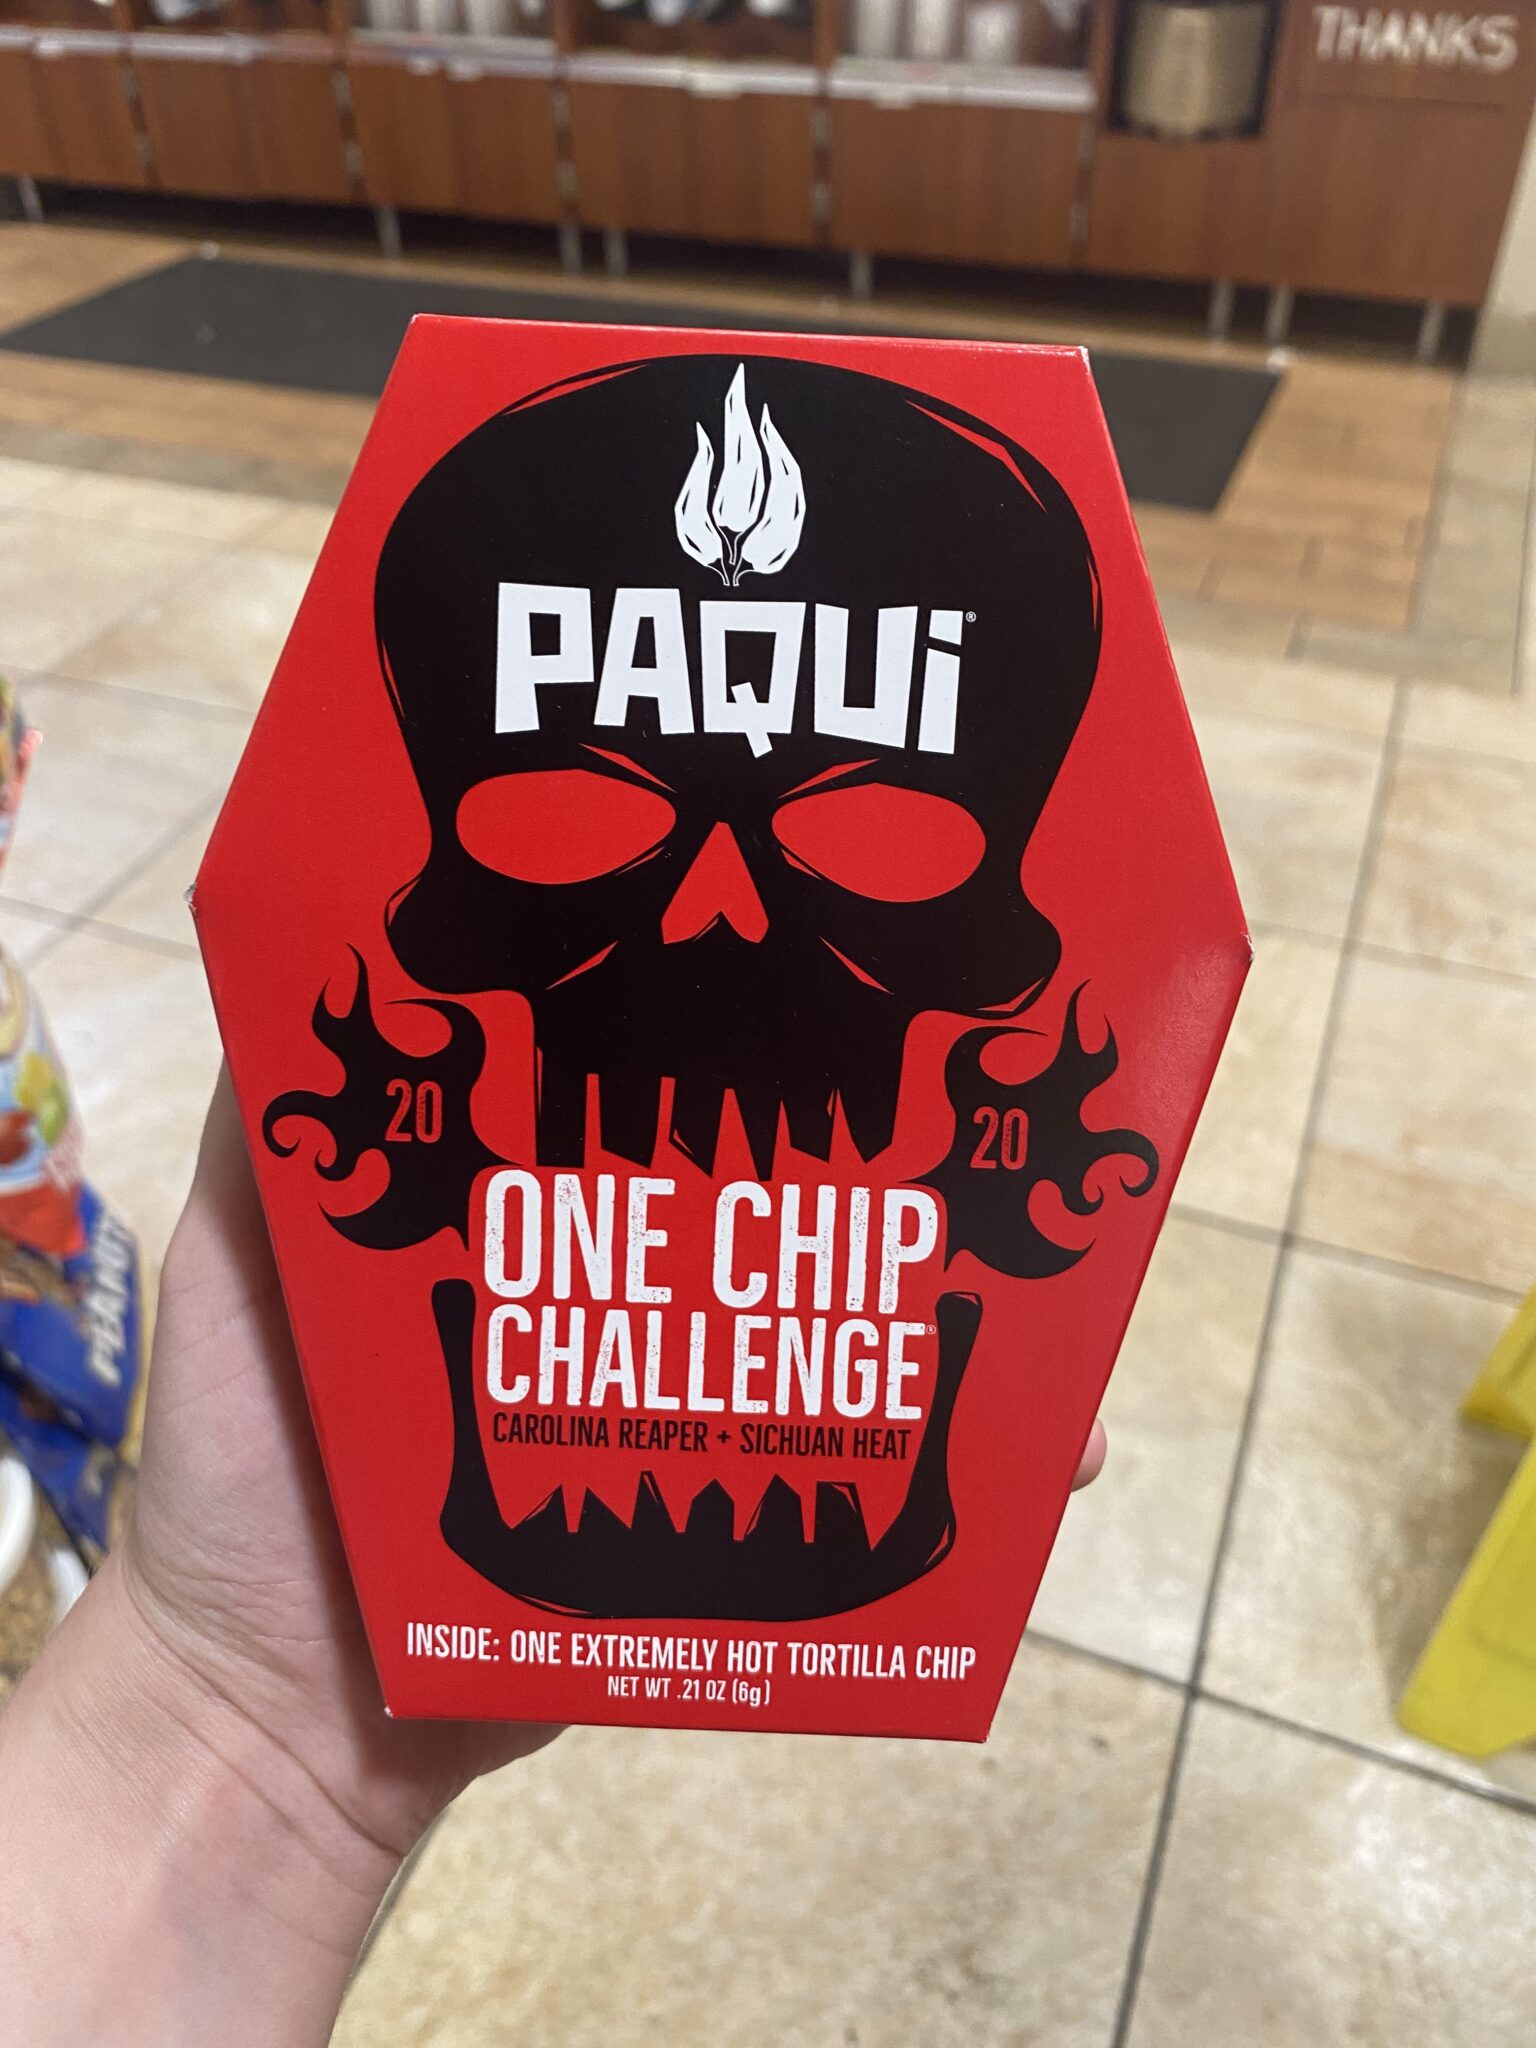 This New Challenge Dares People To Try One Of The Hottest Chips In The